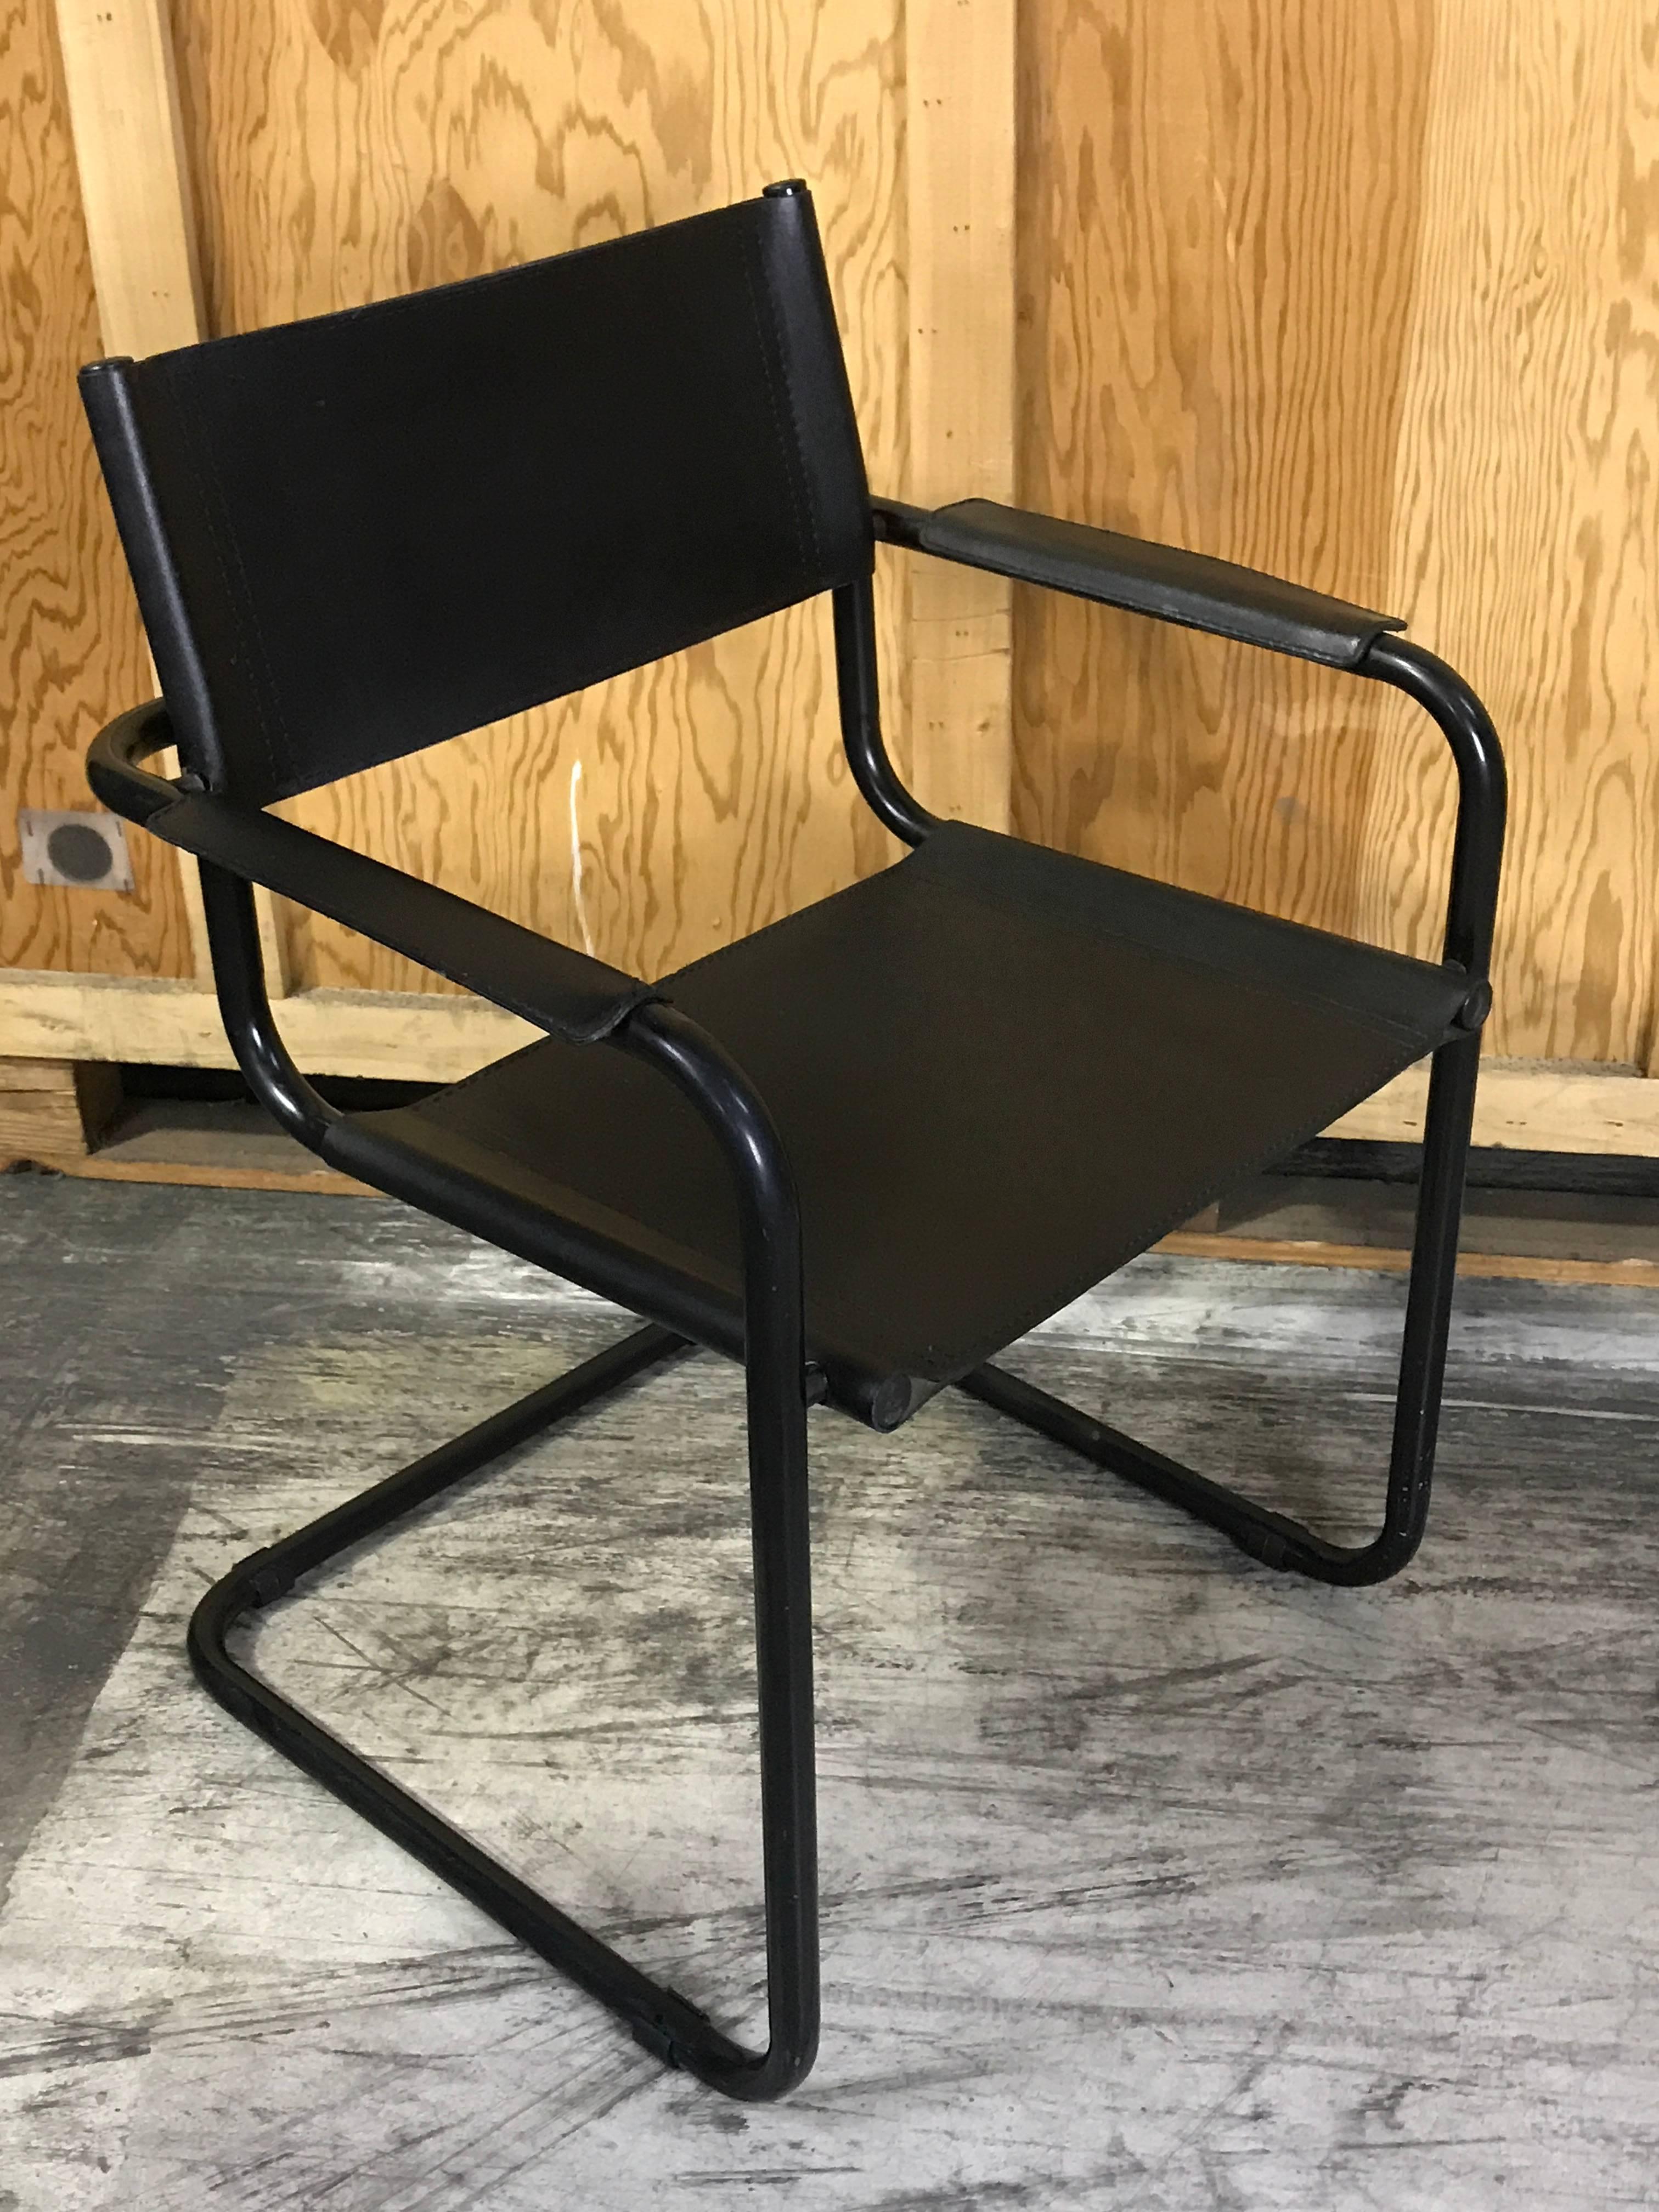 FOUR leather and blackened chrome armchairs by Mart Stam for Fasem
Measures: The height of the arm is 24.5" high.
THIS IS FOR FOUR CHAIRS, NOT THE SIX AS PICTURED 